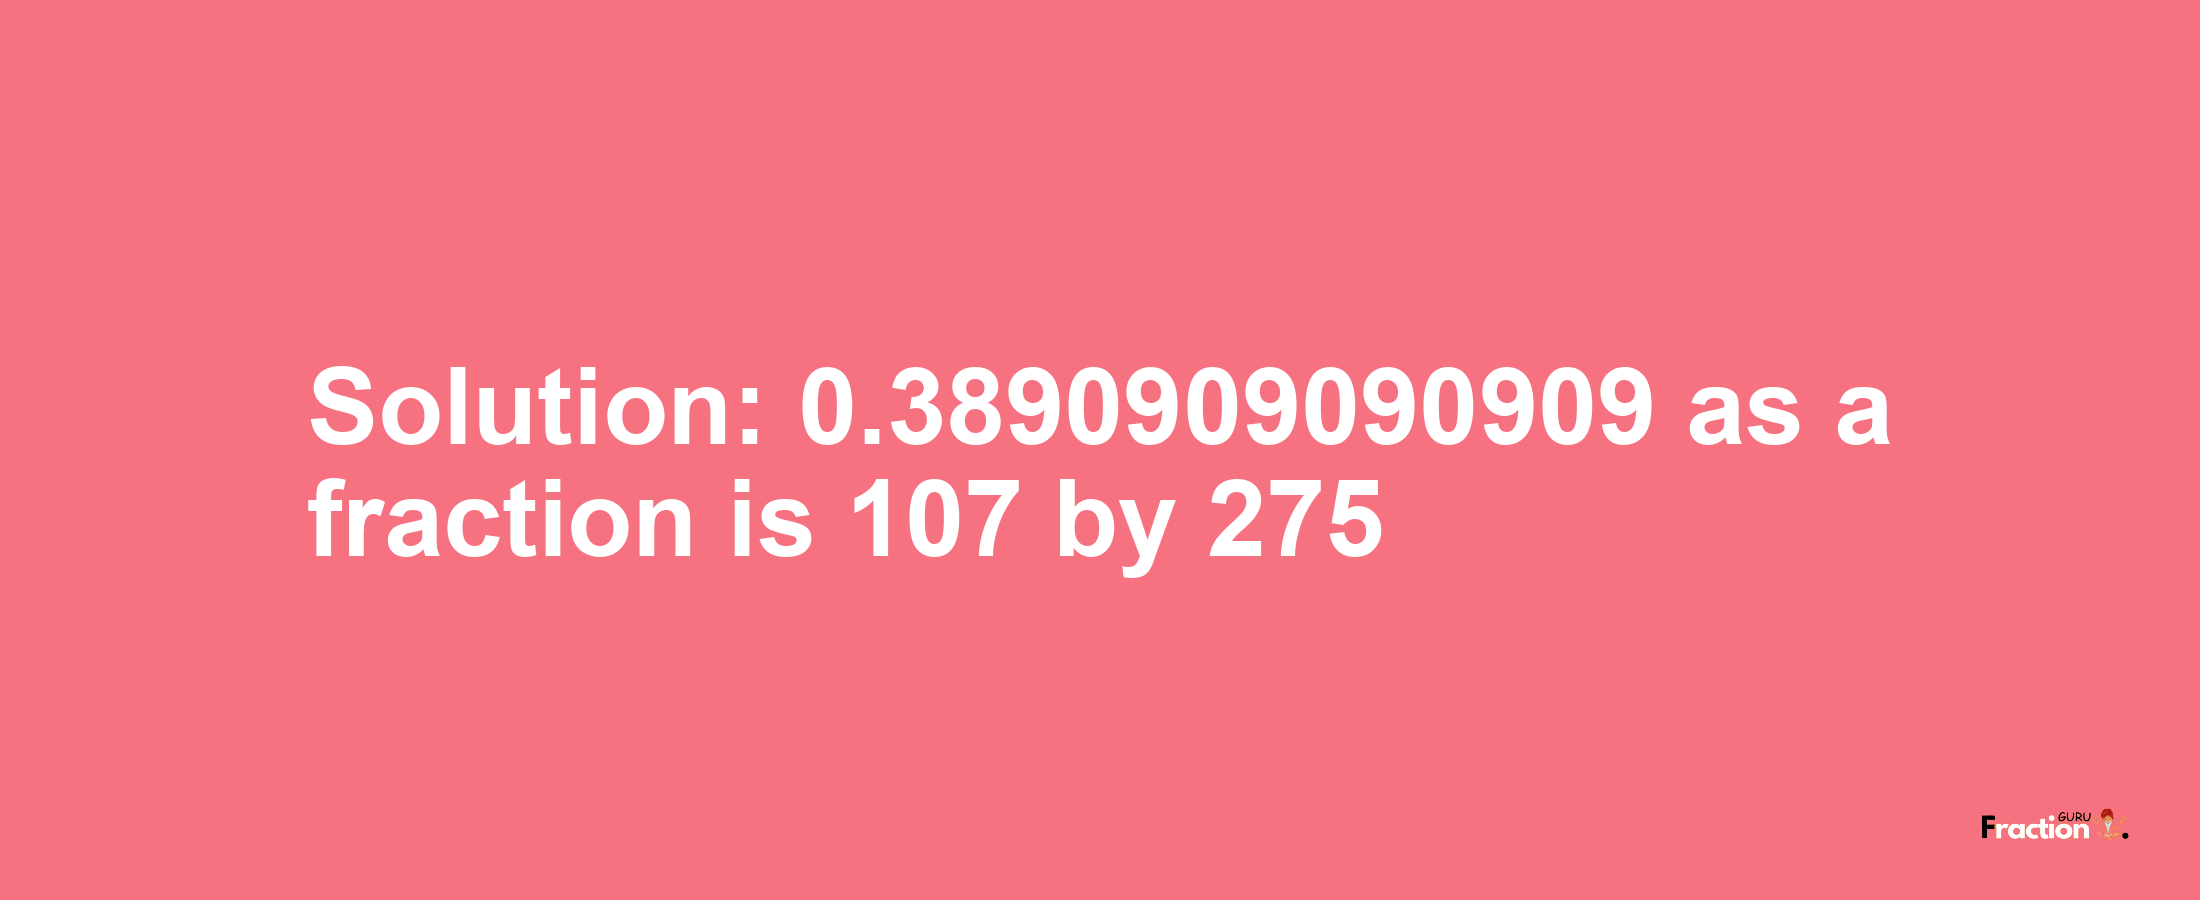 Solution:0.3890909090909 as a fraction is 107/275